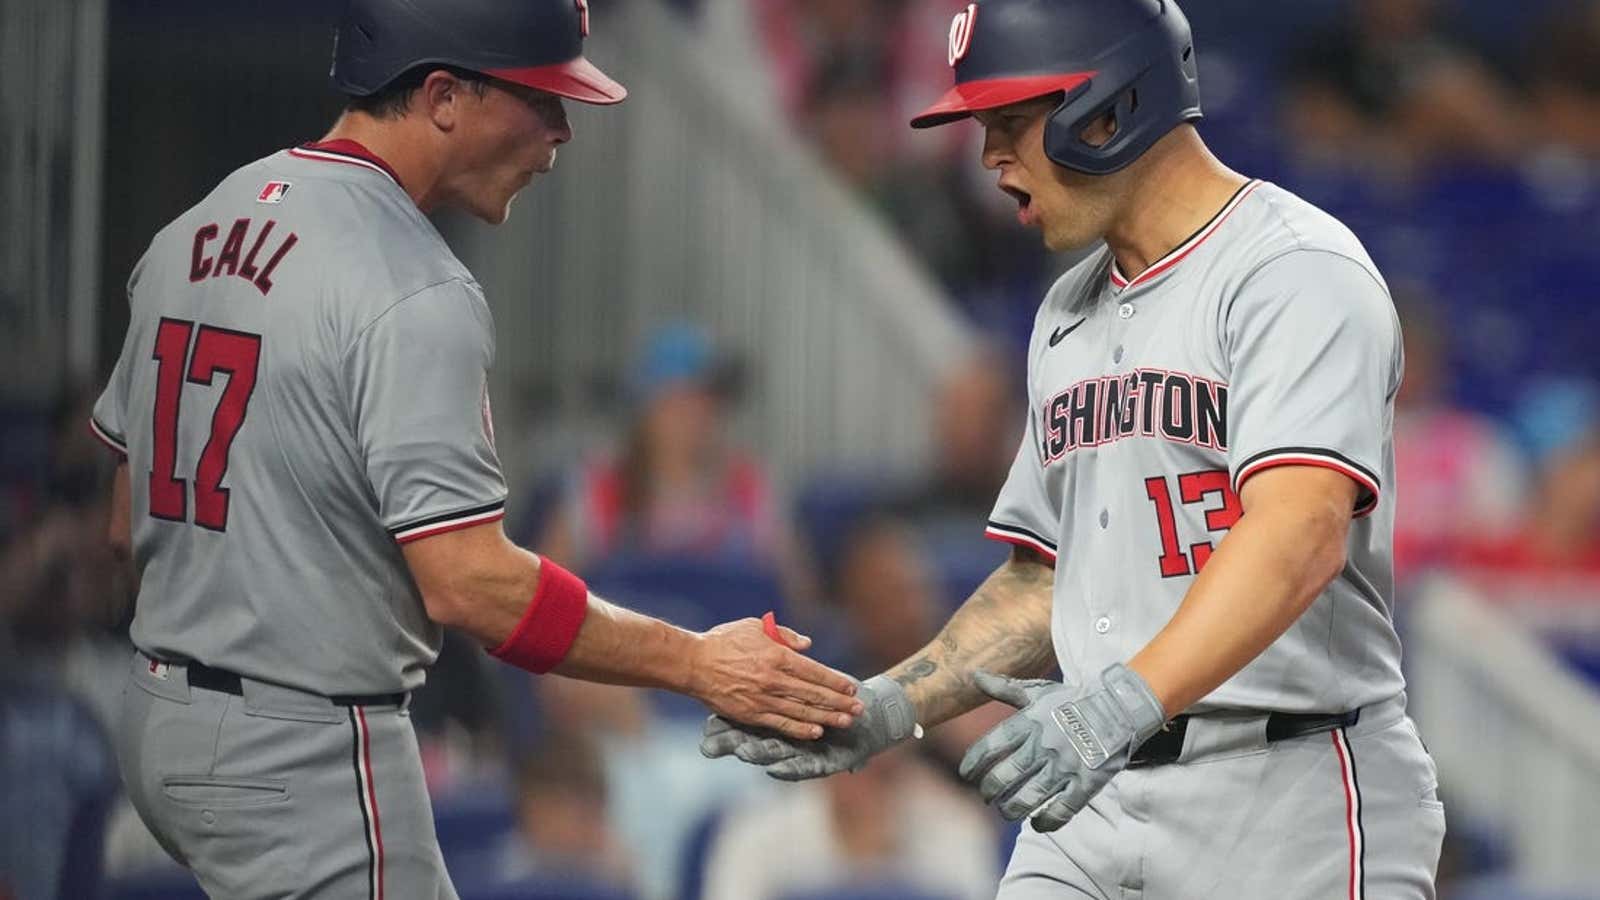 Image for After crushing loss, Marlins hope to avoid being swept by Nationals